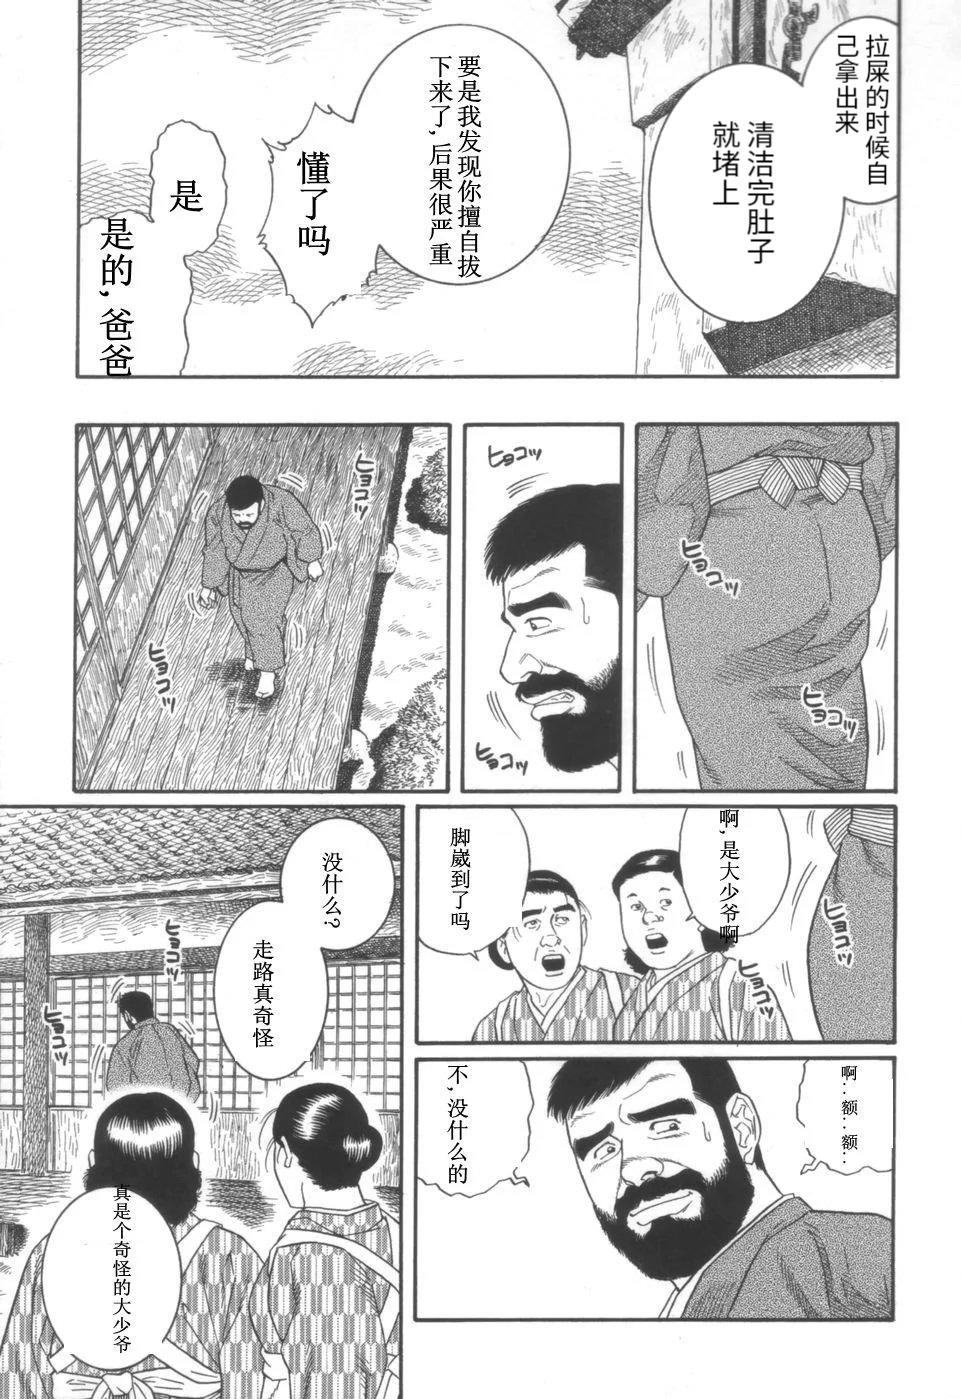 Kinky Gedou no Ie Joukan | 邪道之家 Vol. 1 Ch.3 Gozada - Page 13